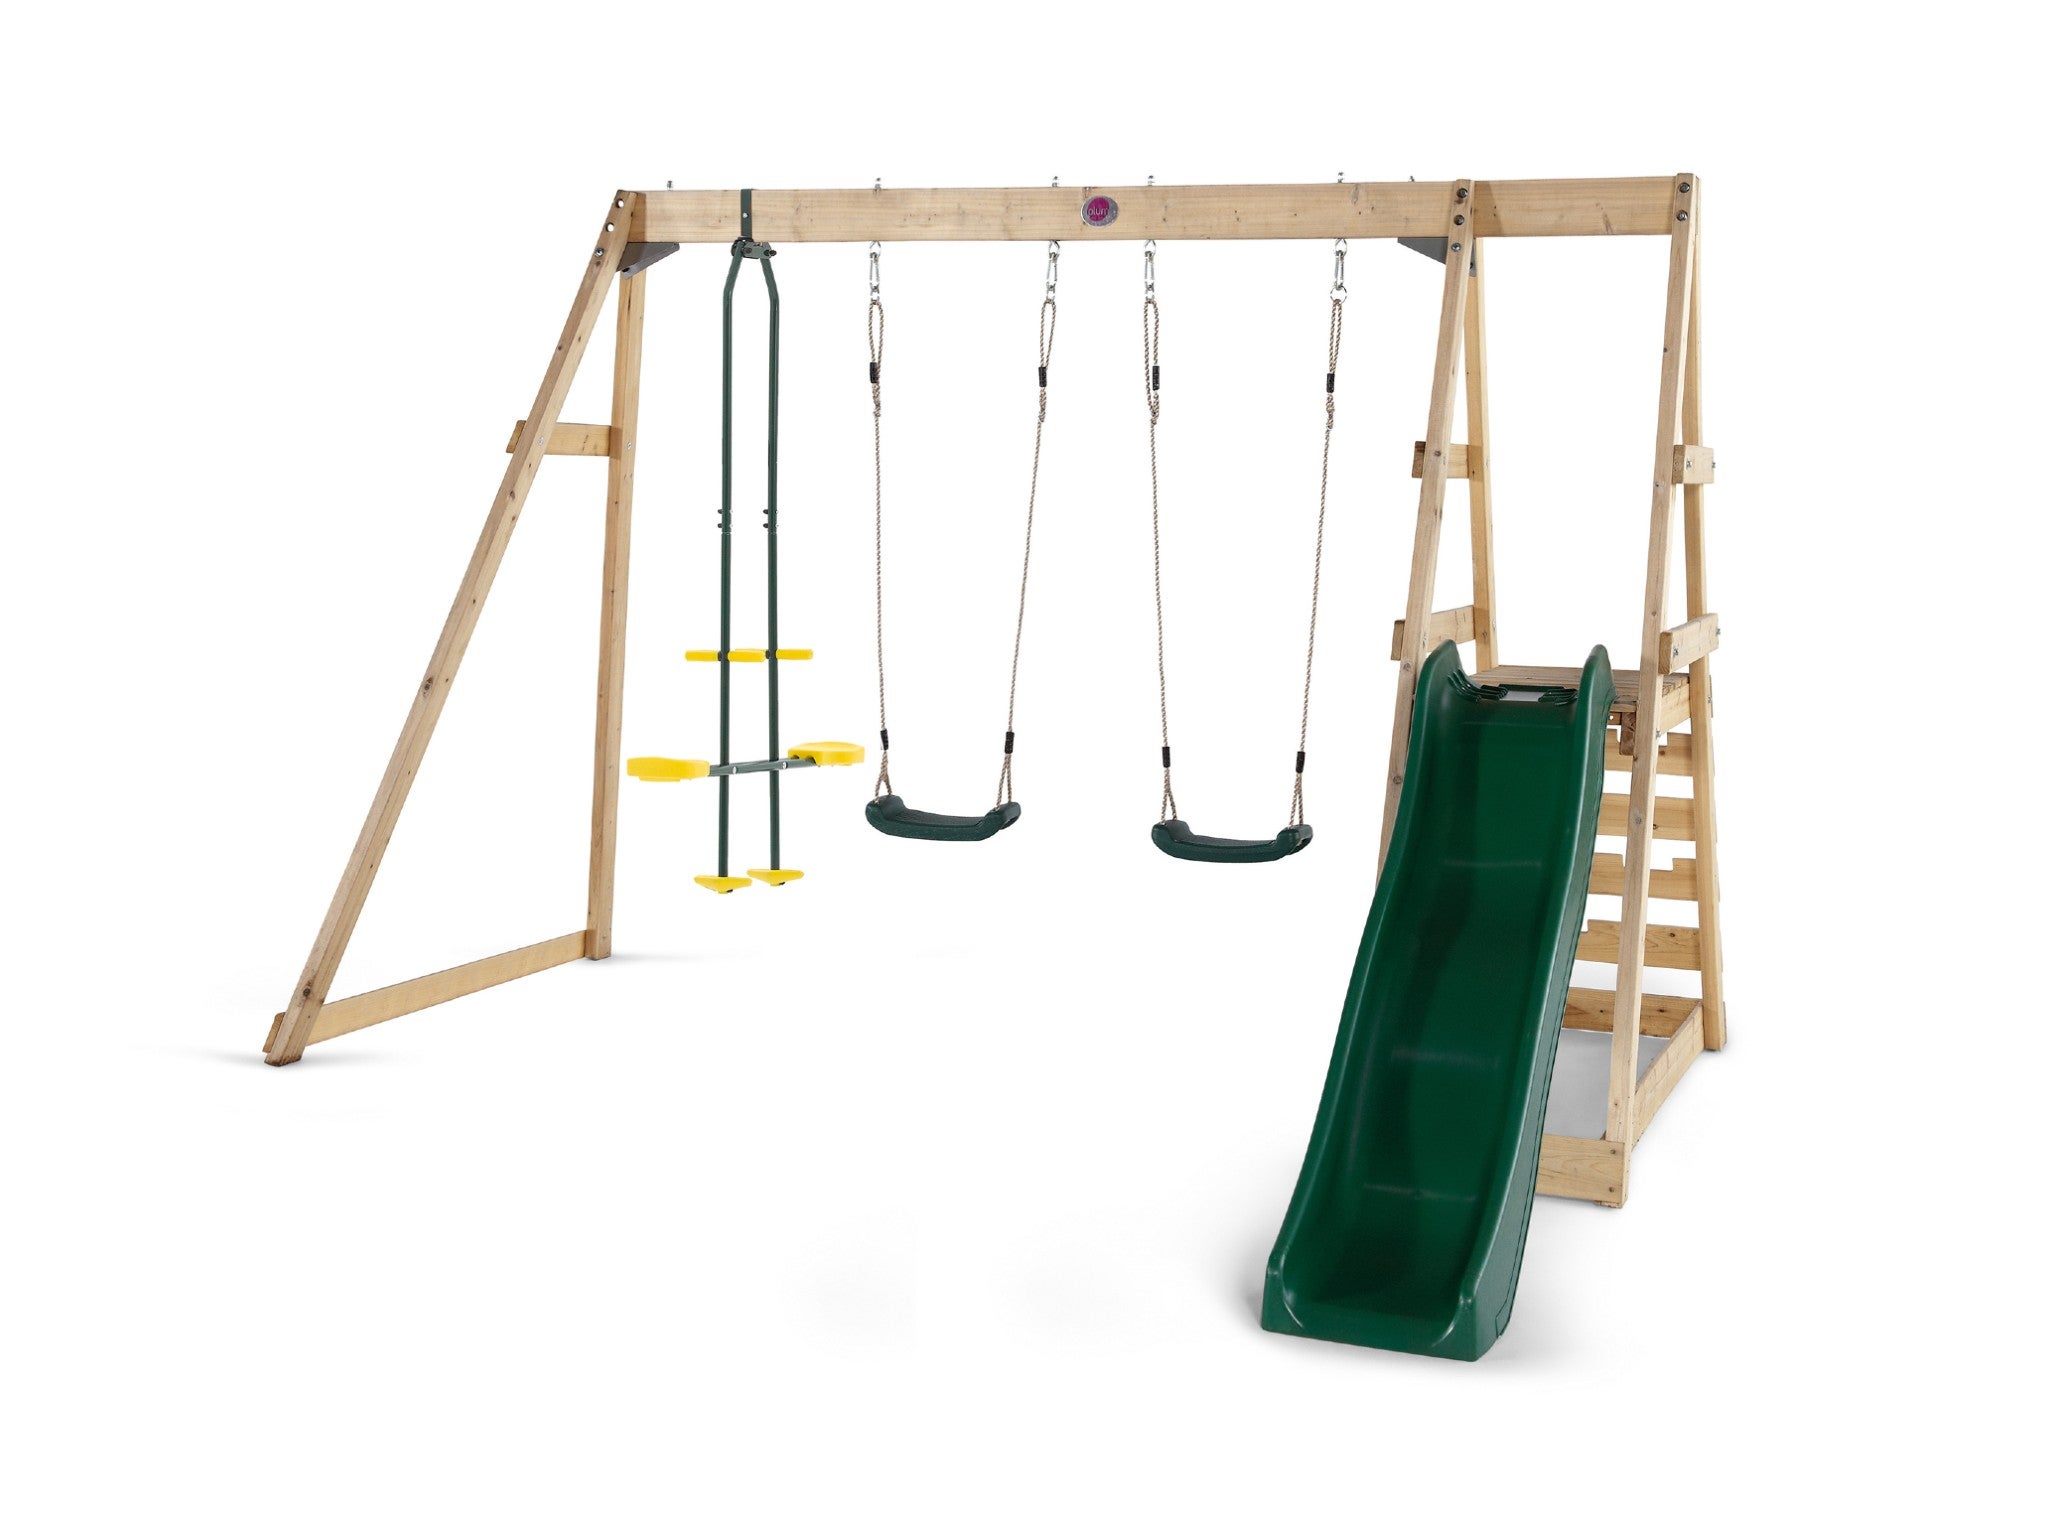 Climbing Rope Swing with Foot Holder Platform and Disc Swing Seat Set for Kids Outdoor Tree Backyard Playground Accessories 